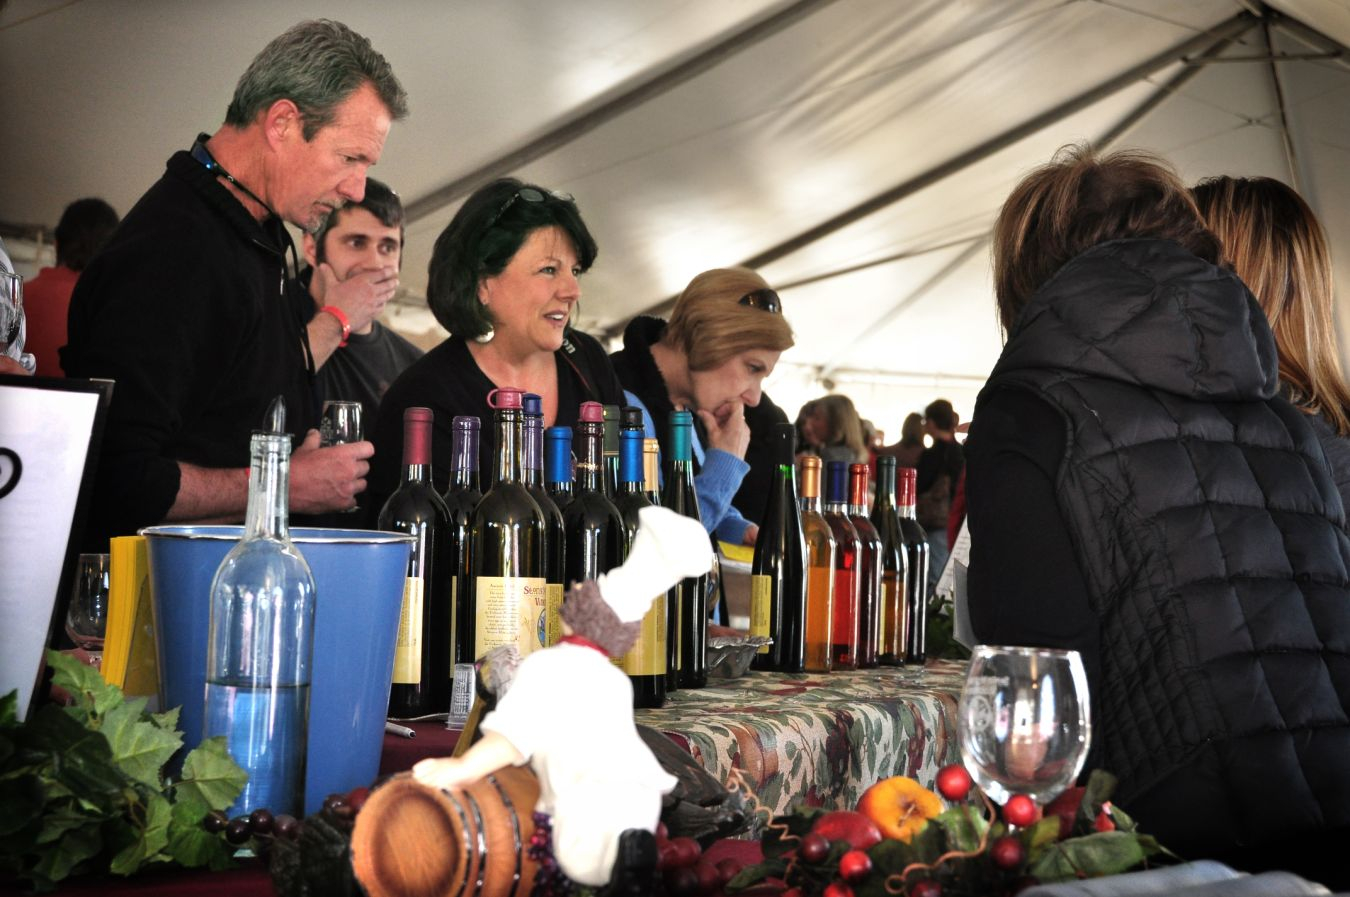 Stanly County Winter Wine Festival